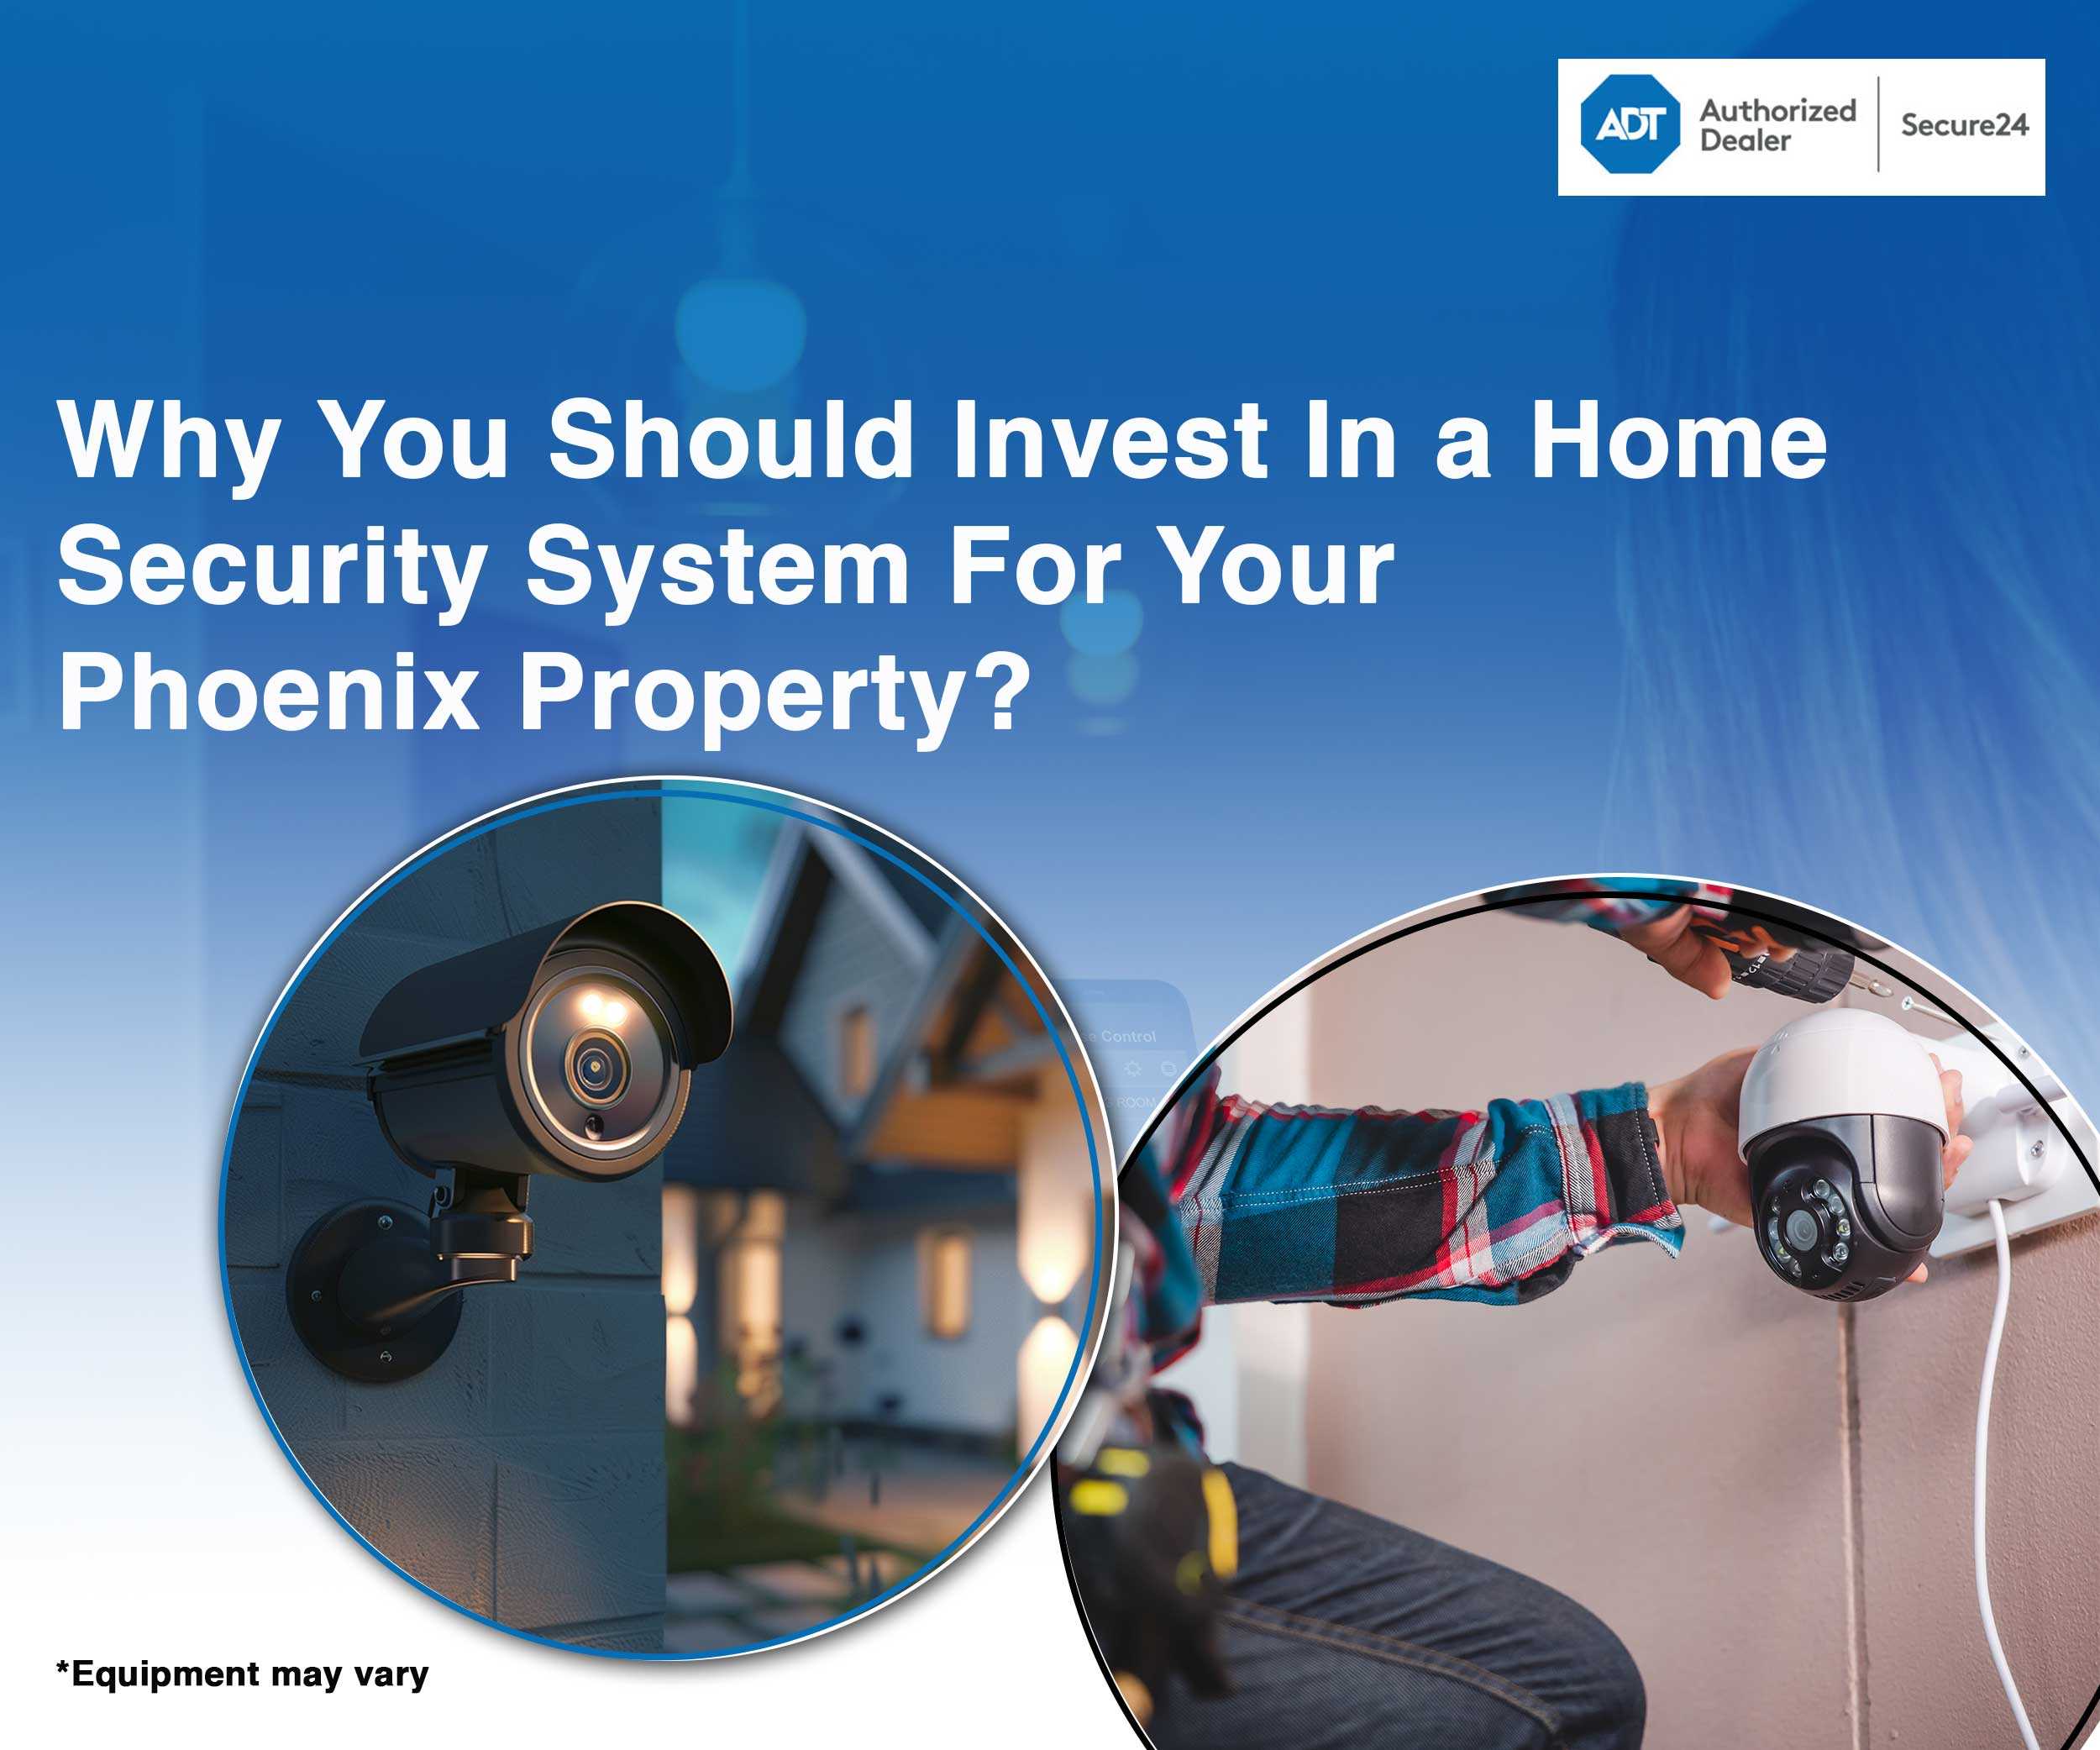 Home Security System For Your Phoenix Property